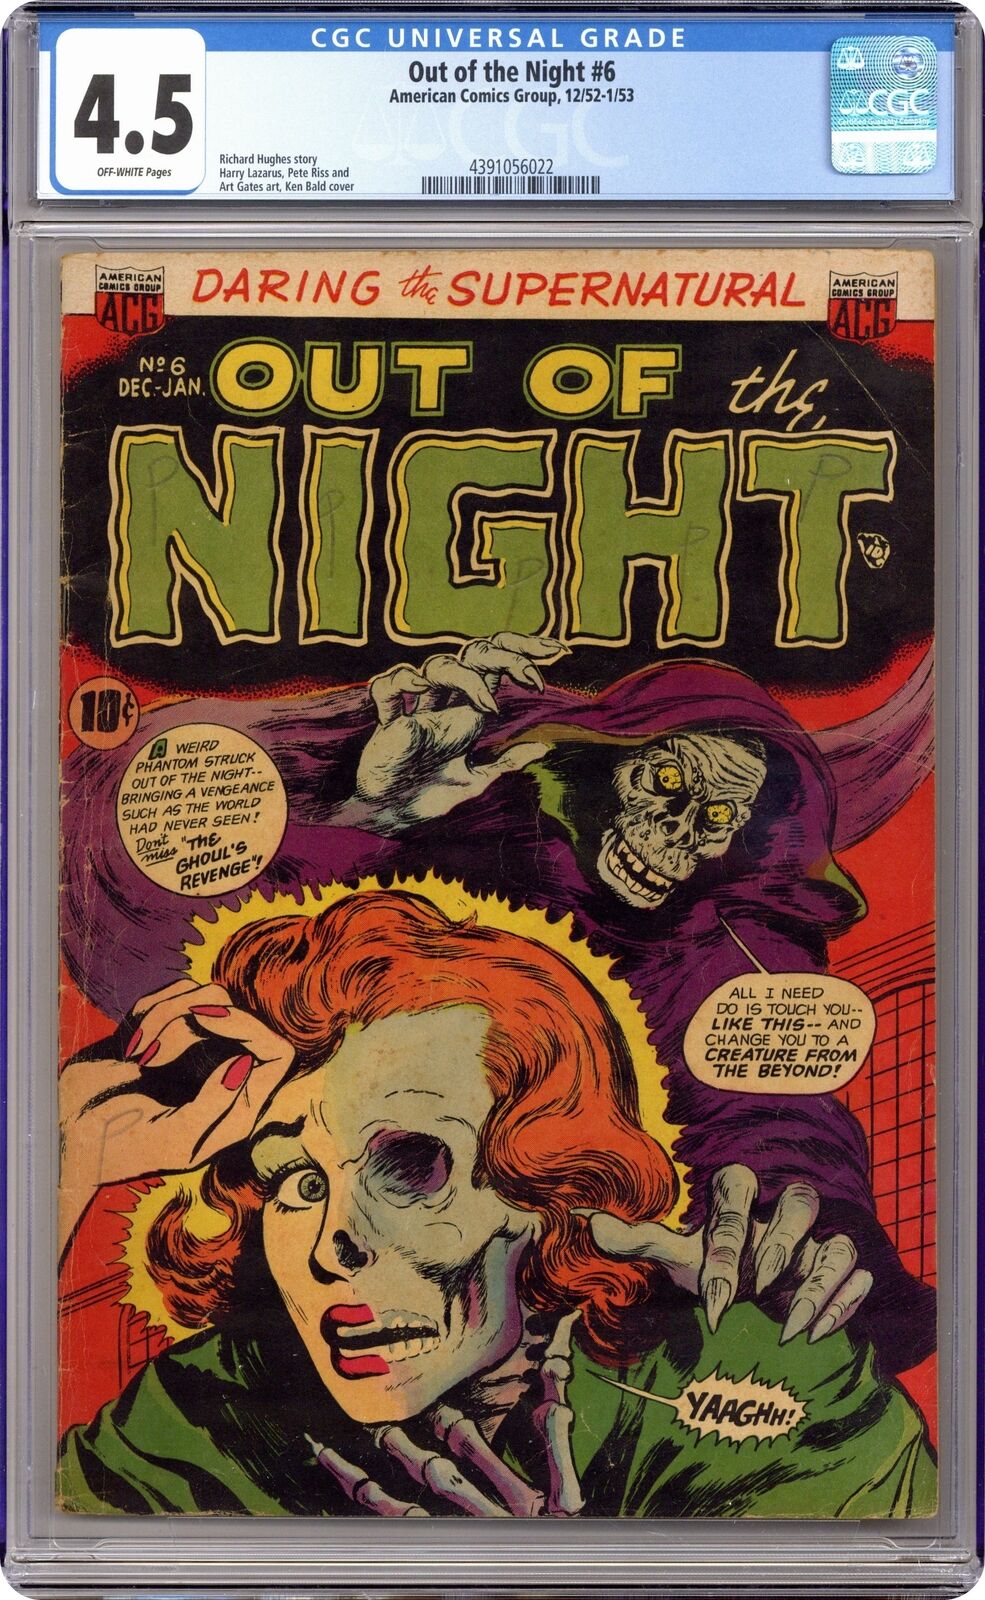 Out of the Night #6 CGC 4.5 1952 4391056022